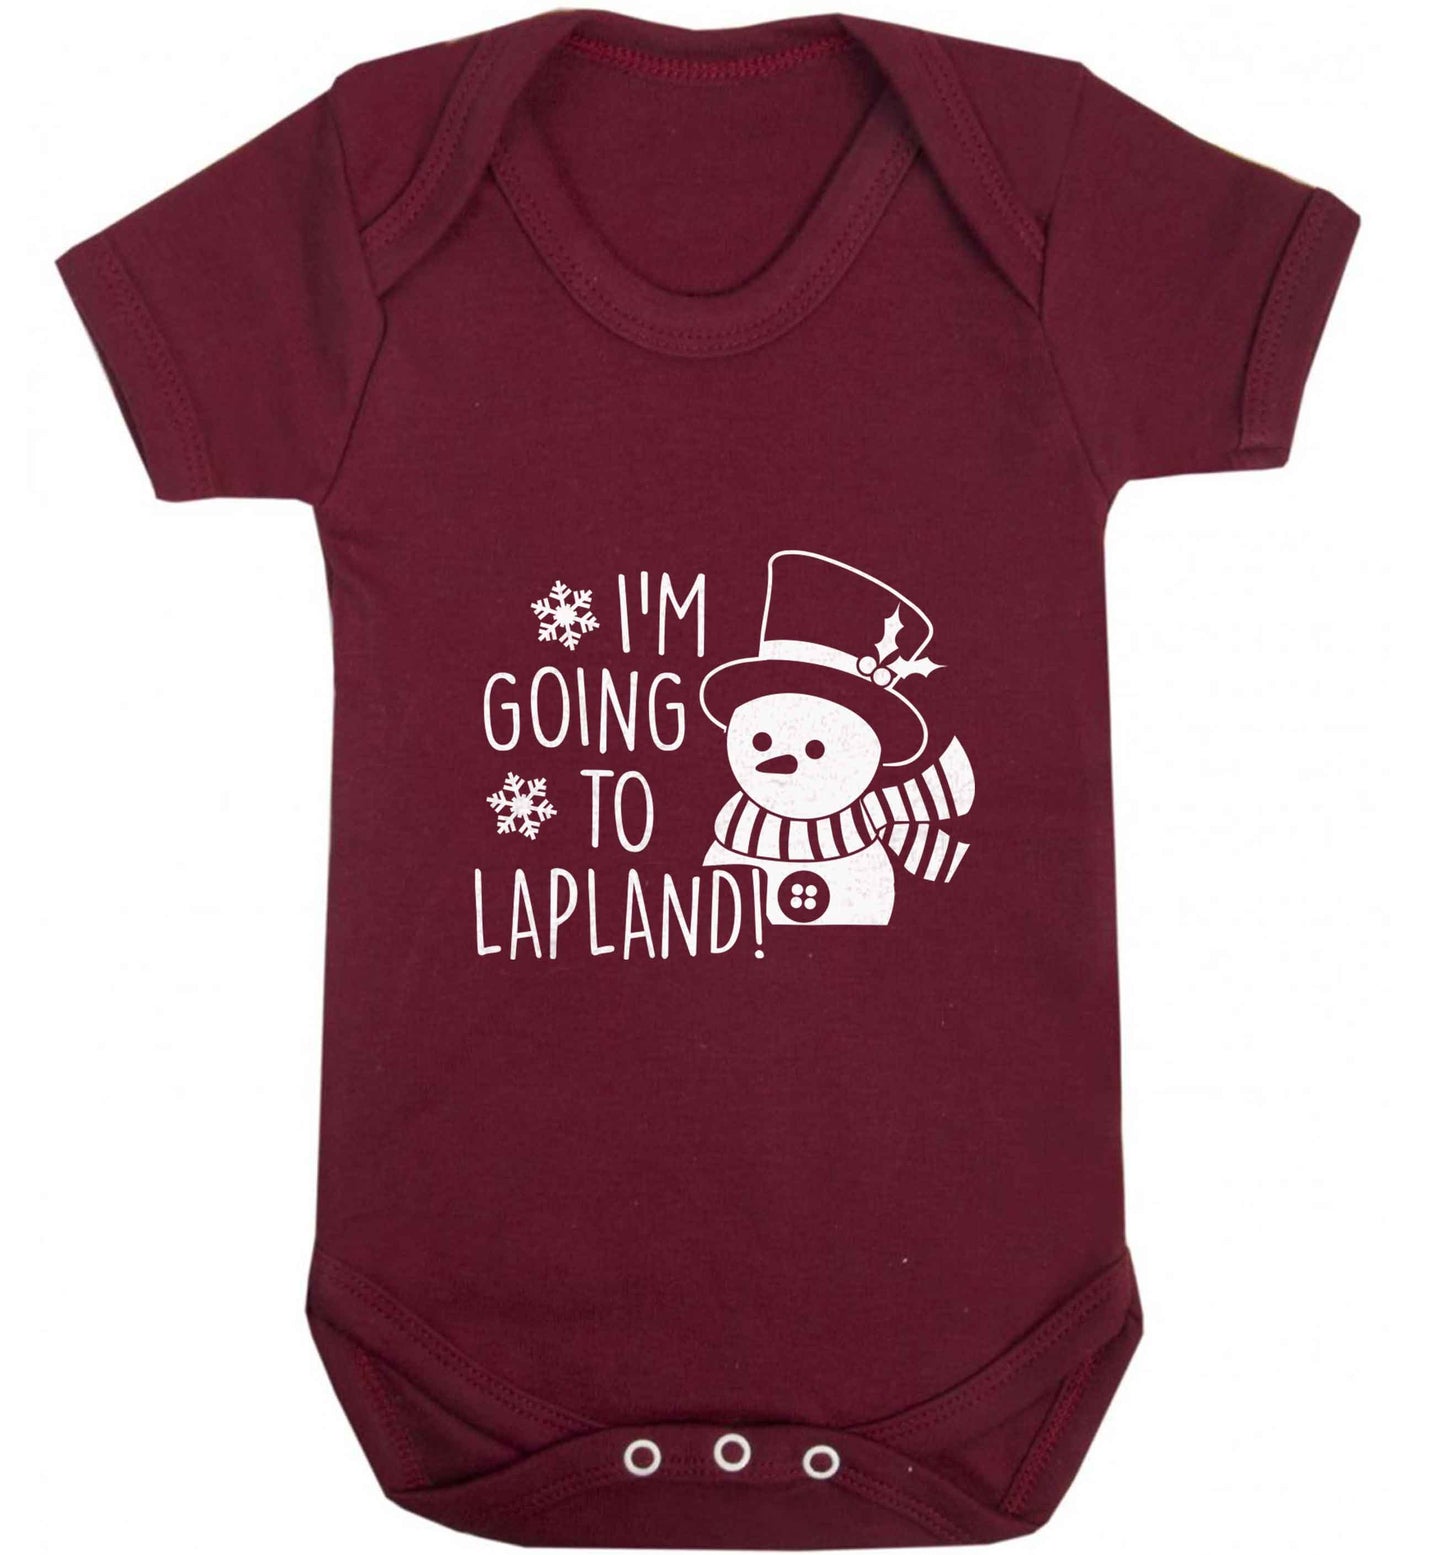 I'm going to Lapland baby vest maroon 18-24 months